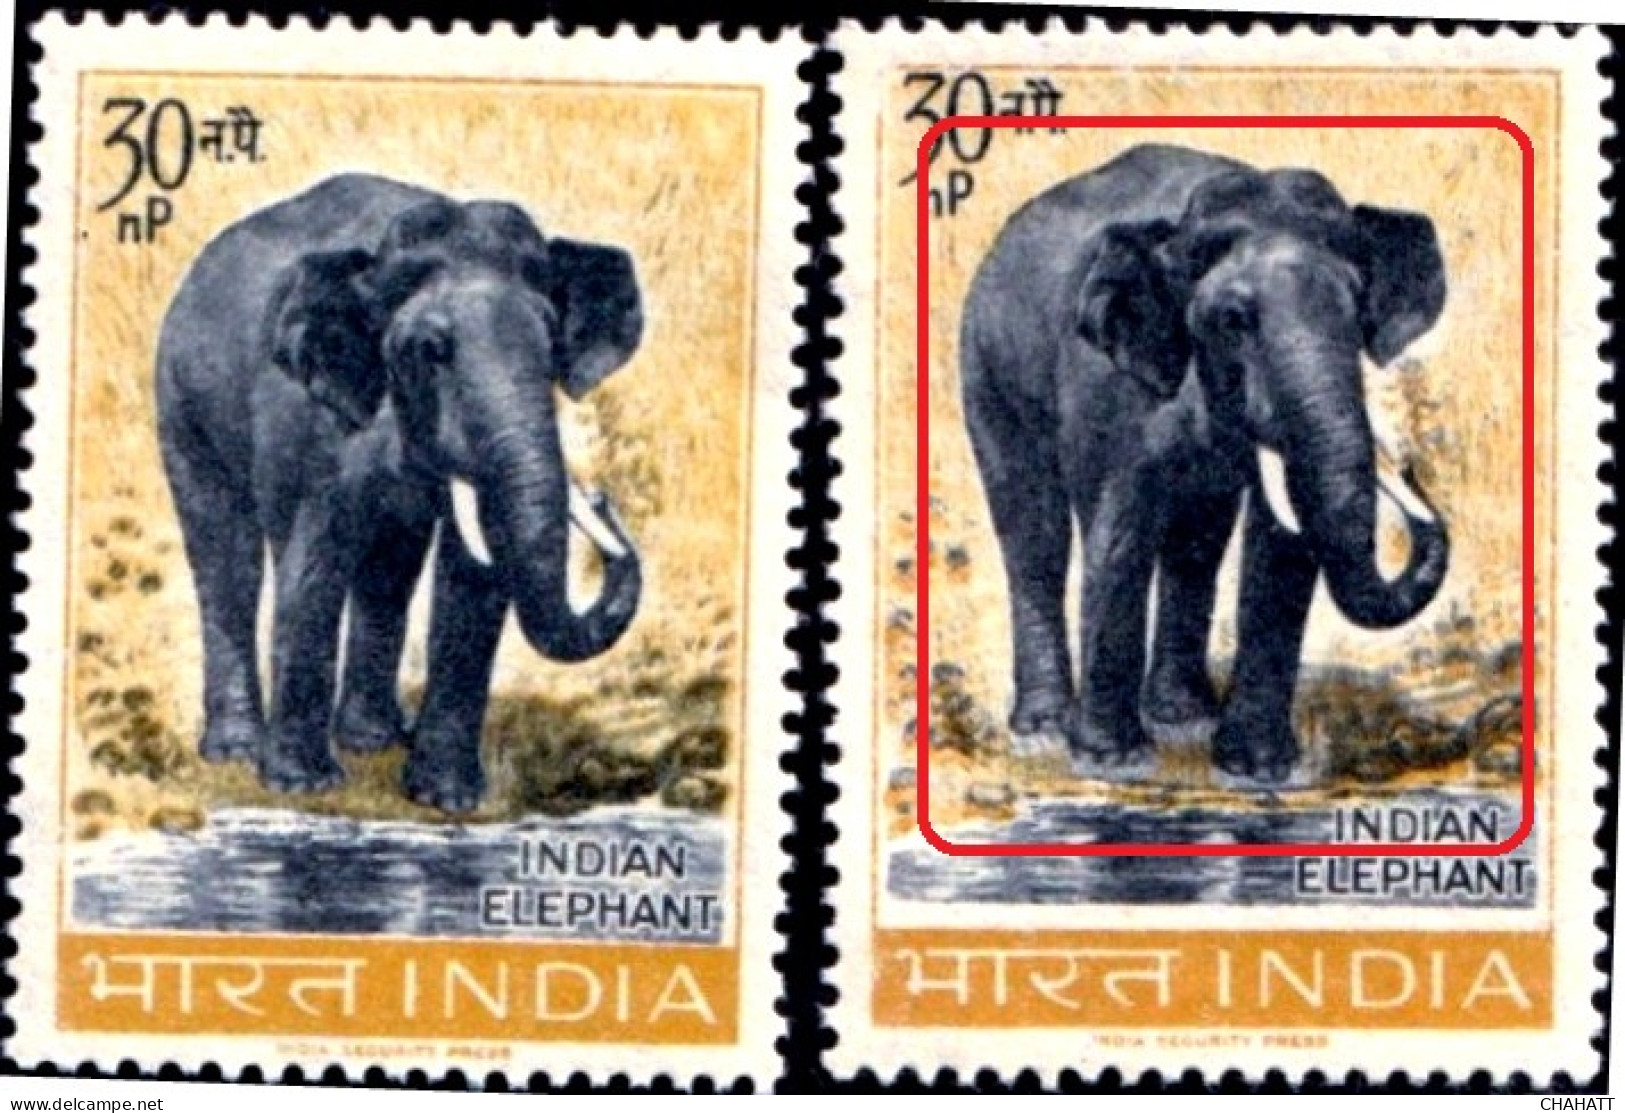 INDIAN ELEPHANT- 30np-WATERMARKED- INDIA 1963- COLOR VARIETY -MNH-IE-92 - Variedades Y Curiosidades